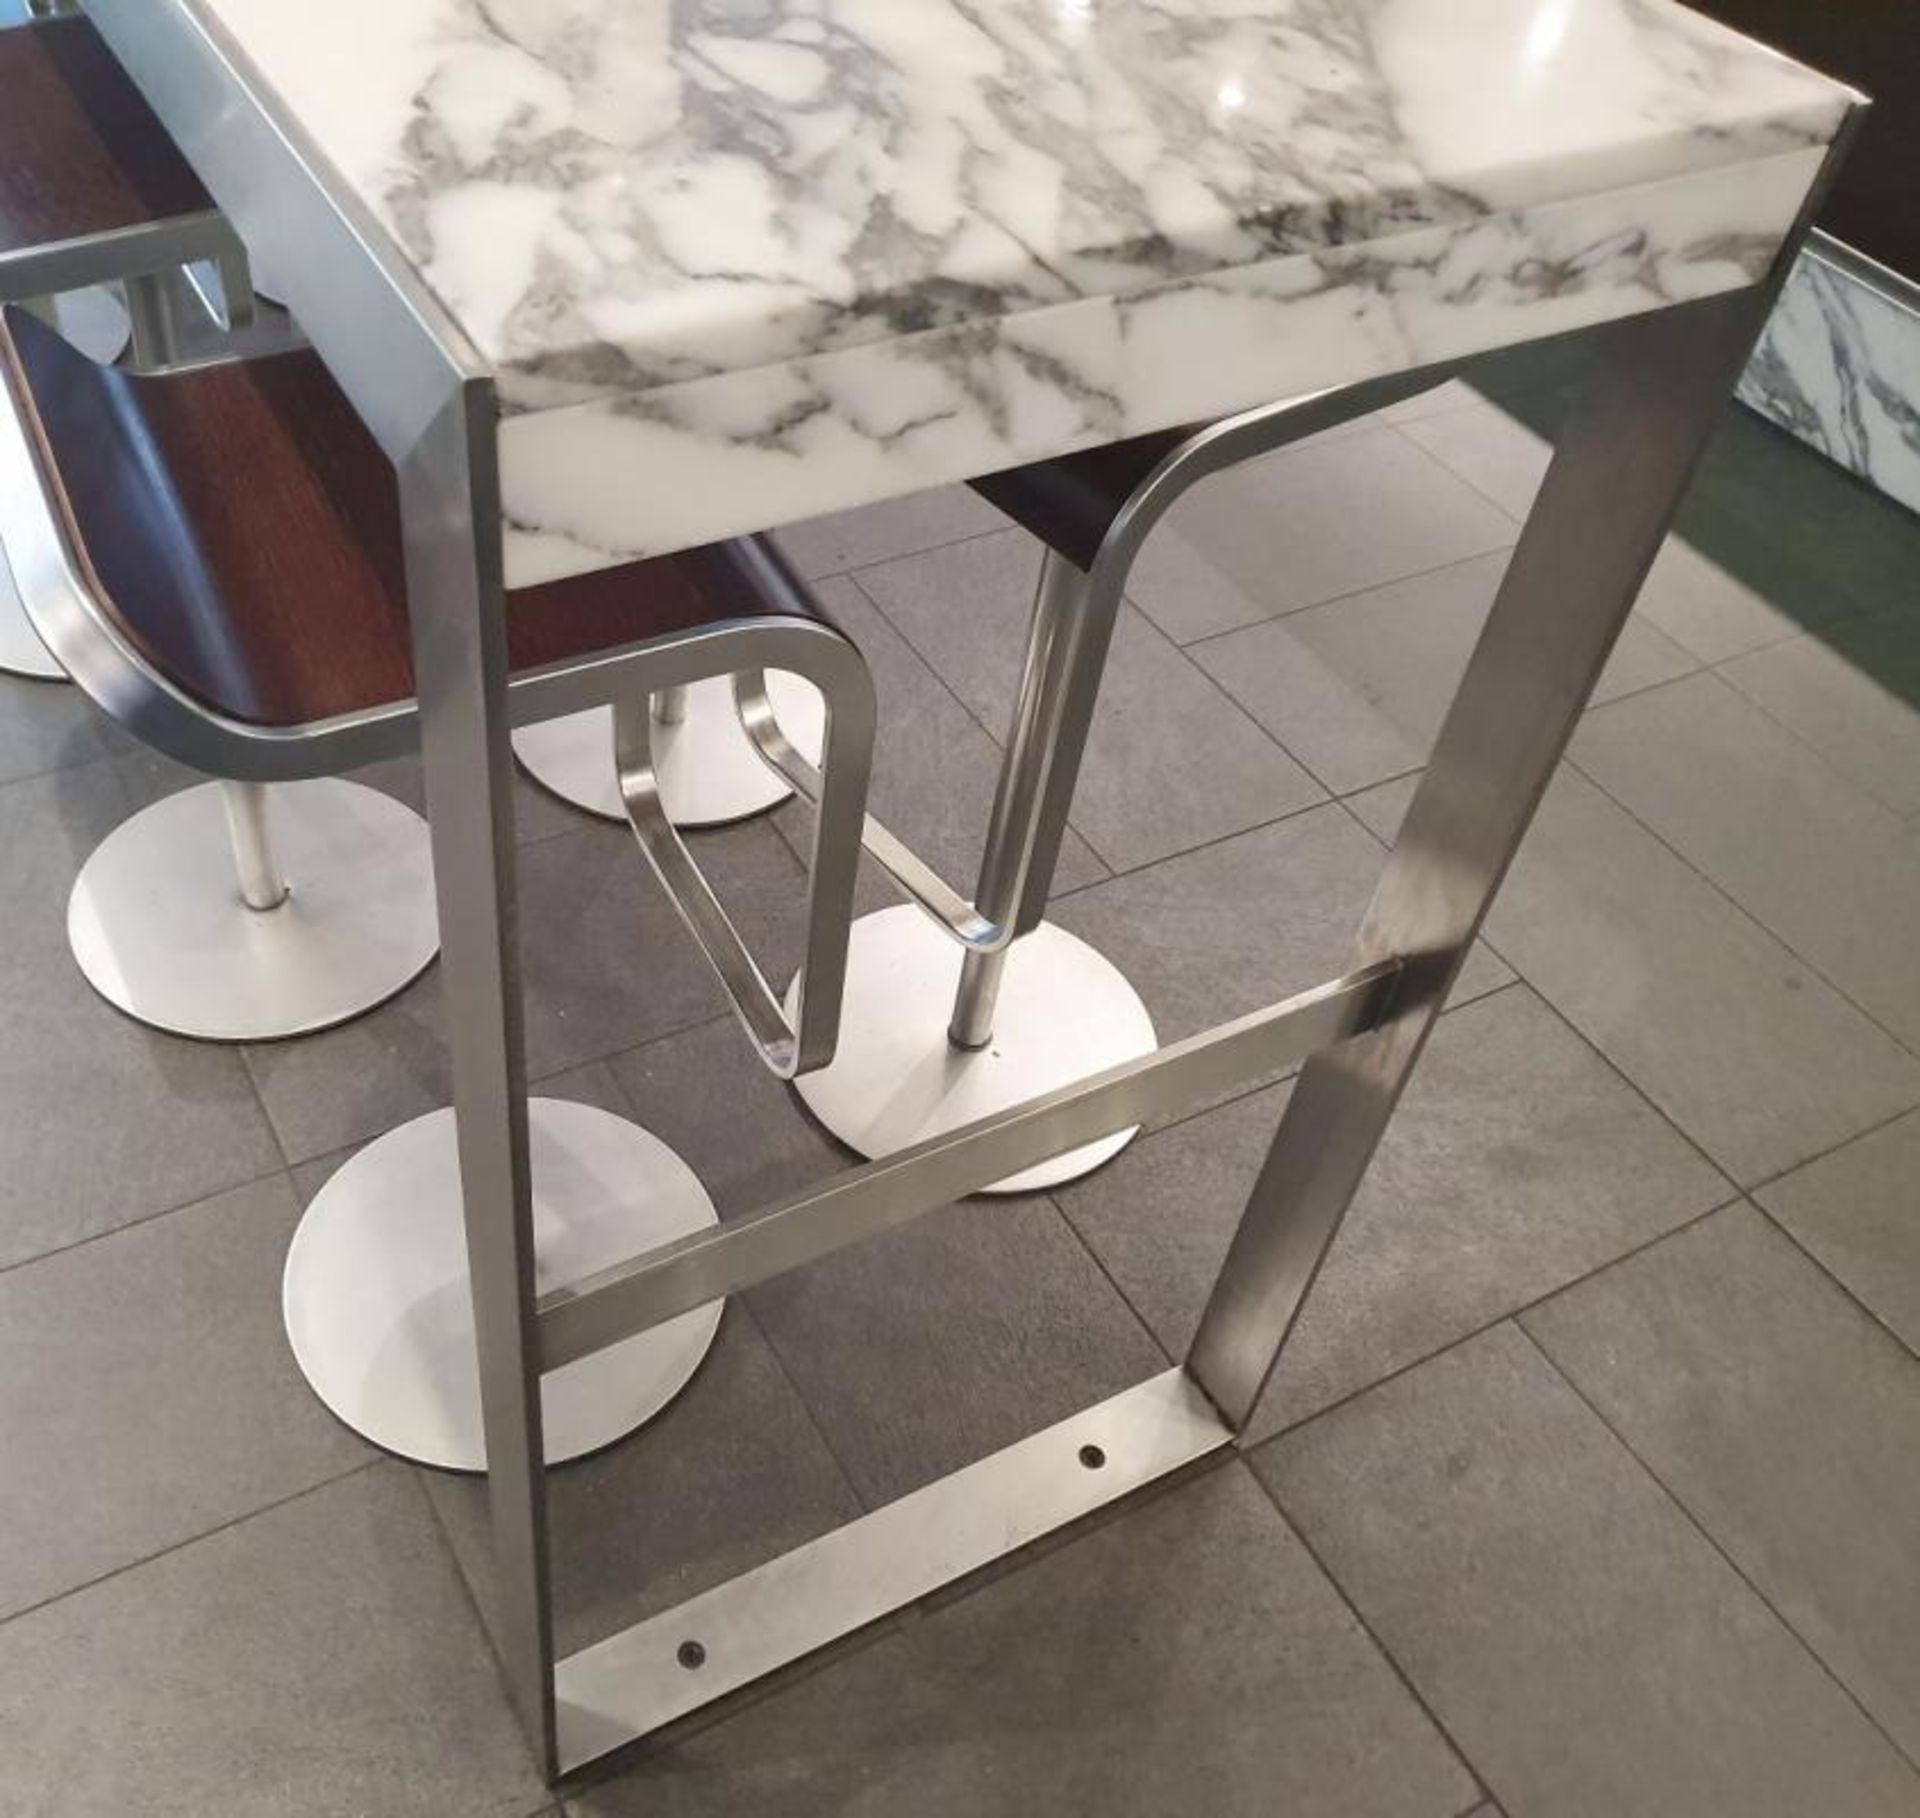 1 x White Marble/Granite Topped Cocktail Table - From A Milan-style City Centre Cafe - Image 6 of 7